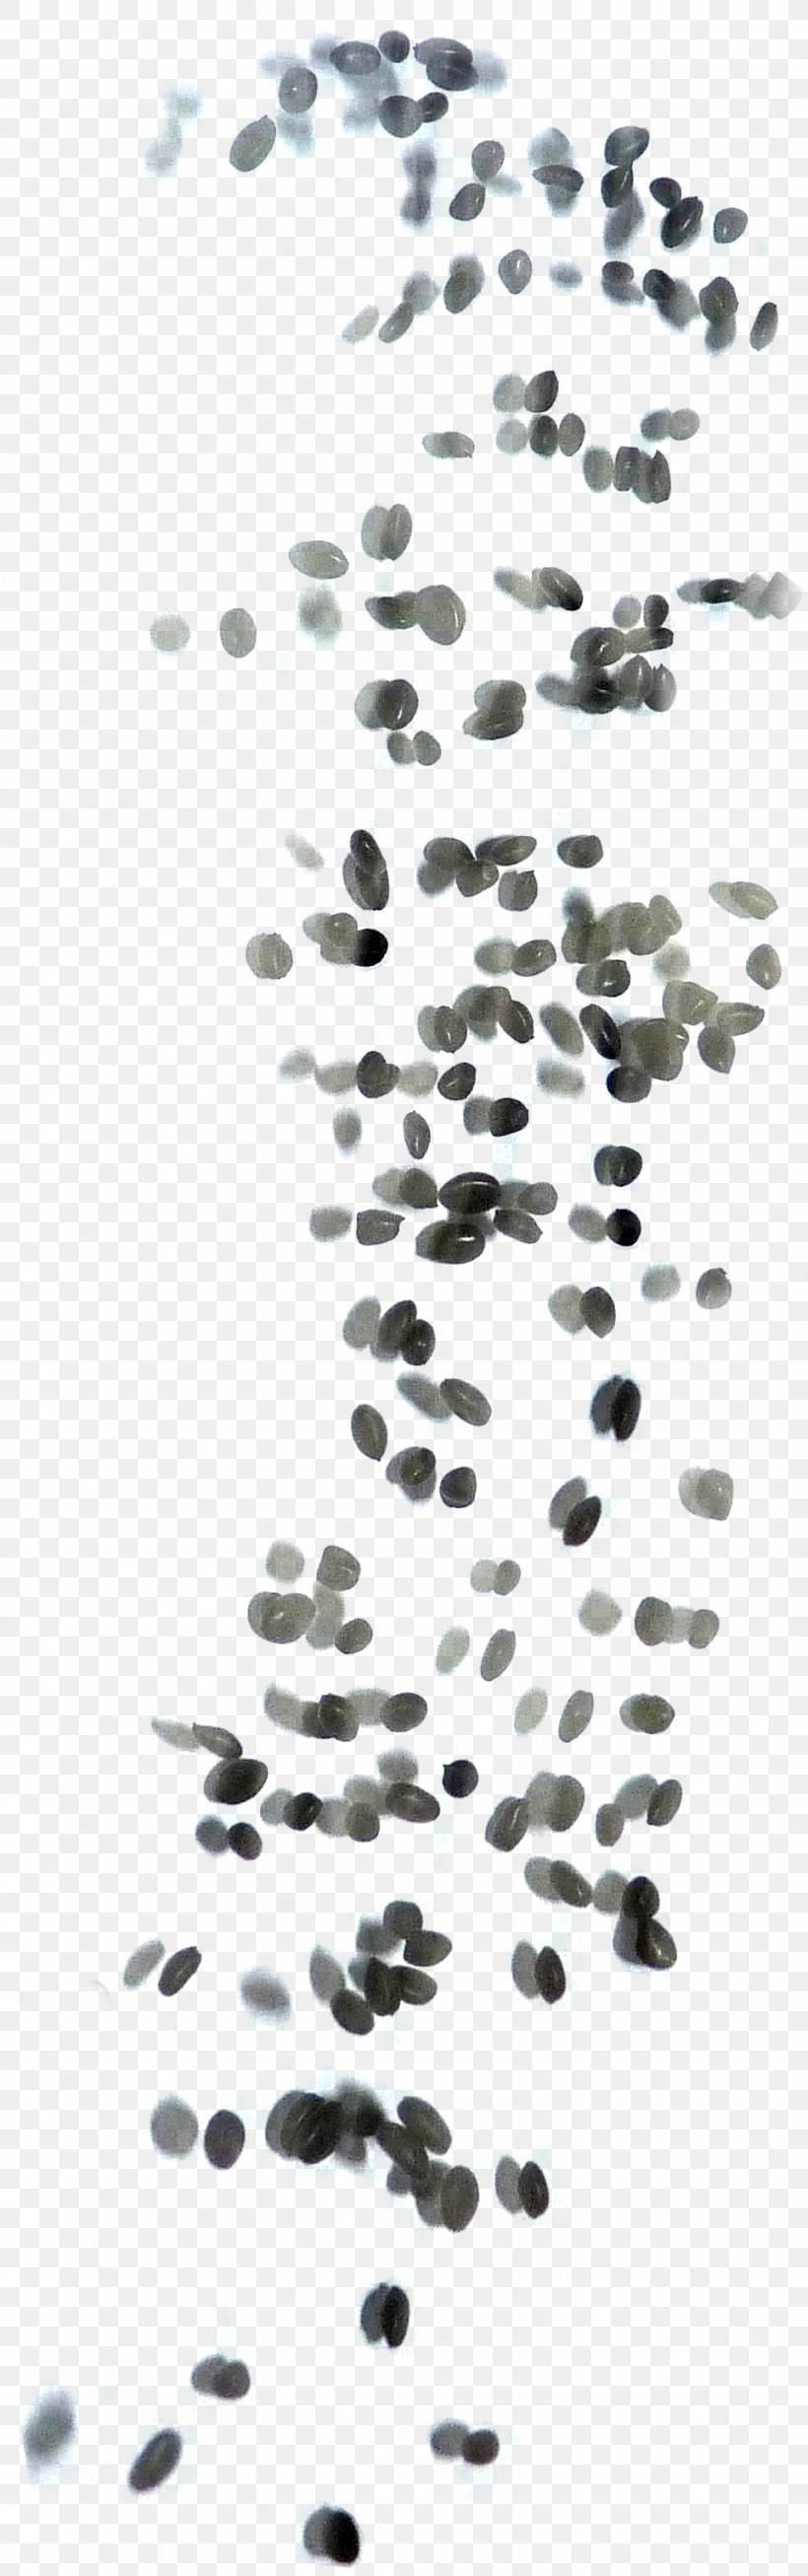 Thermoplastic Elastomer Transparency And Translucency Material Opacity, PNG, 963x3069px, Thermoplastic Elastomer, Black And White, Copolymer, Elastomer, Epdm Rubber Download Free